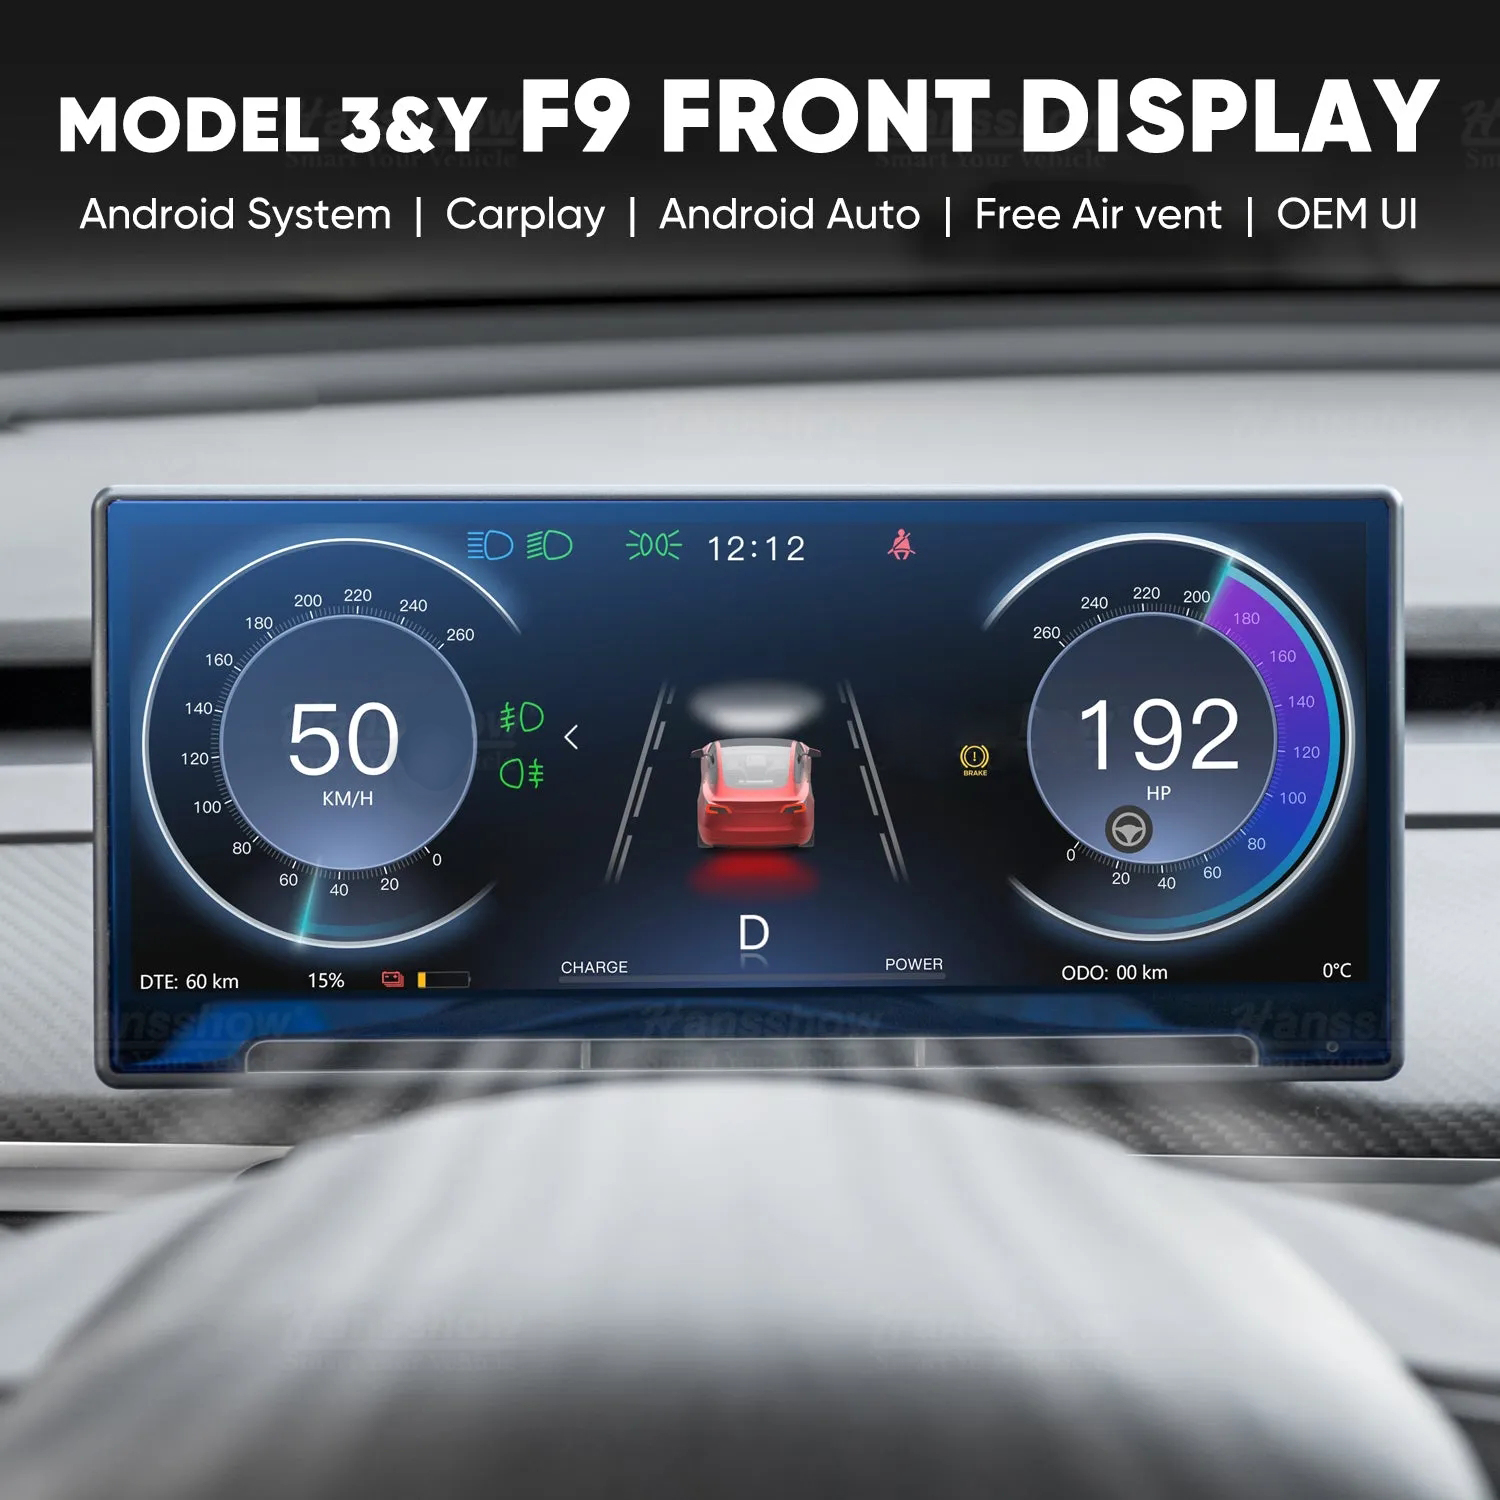 Tesstudio F9 9-Inch Touchscreen Dashboard Display with Carplay & Android Auto For Tesla Model 3/Y -Tes studioScreen,Model Y,Model 3,Model 3 interior,Model Y interiortesla accessories